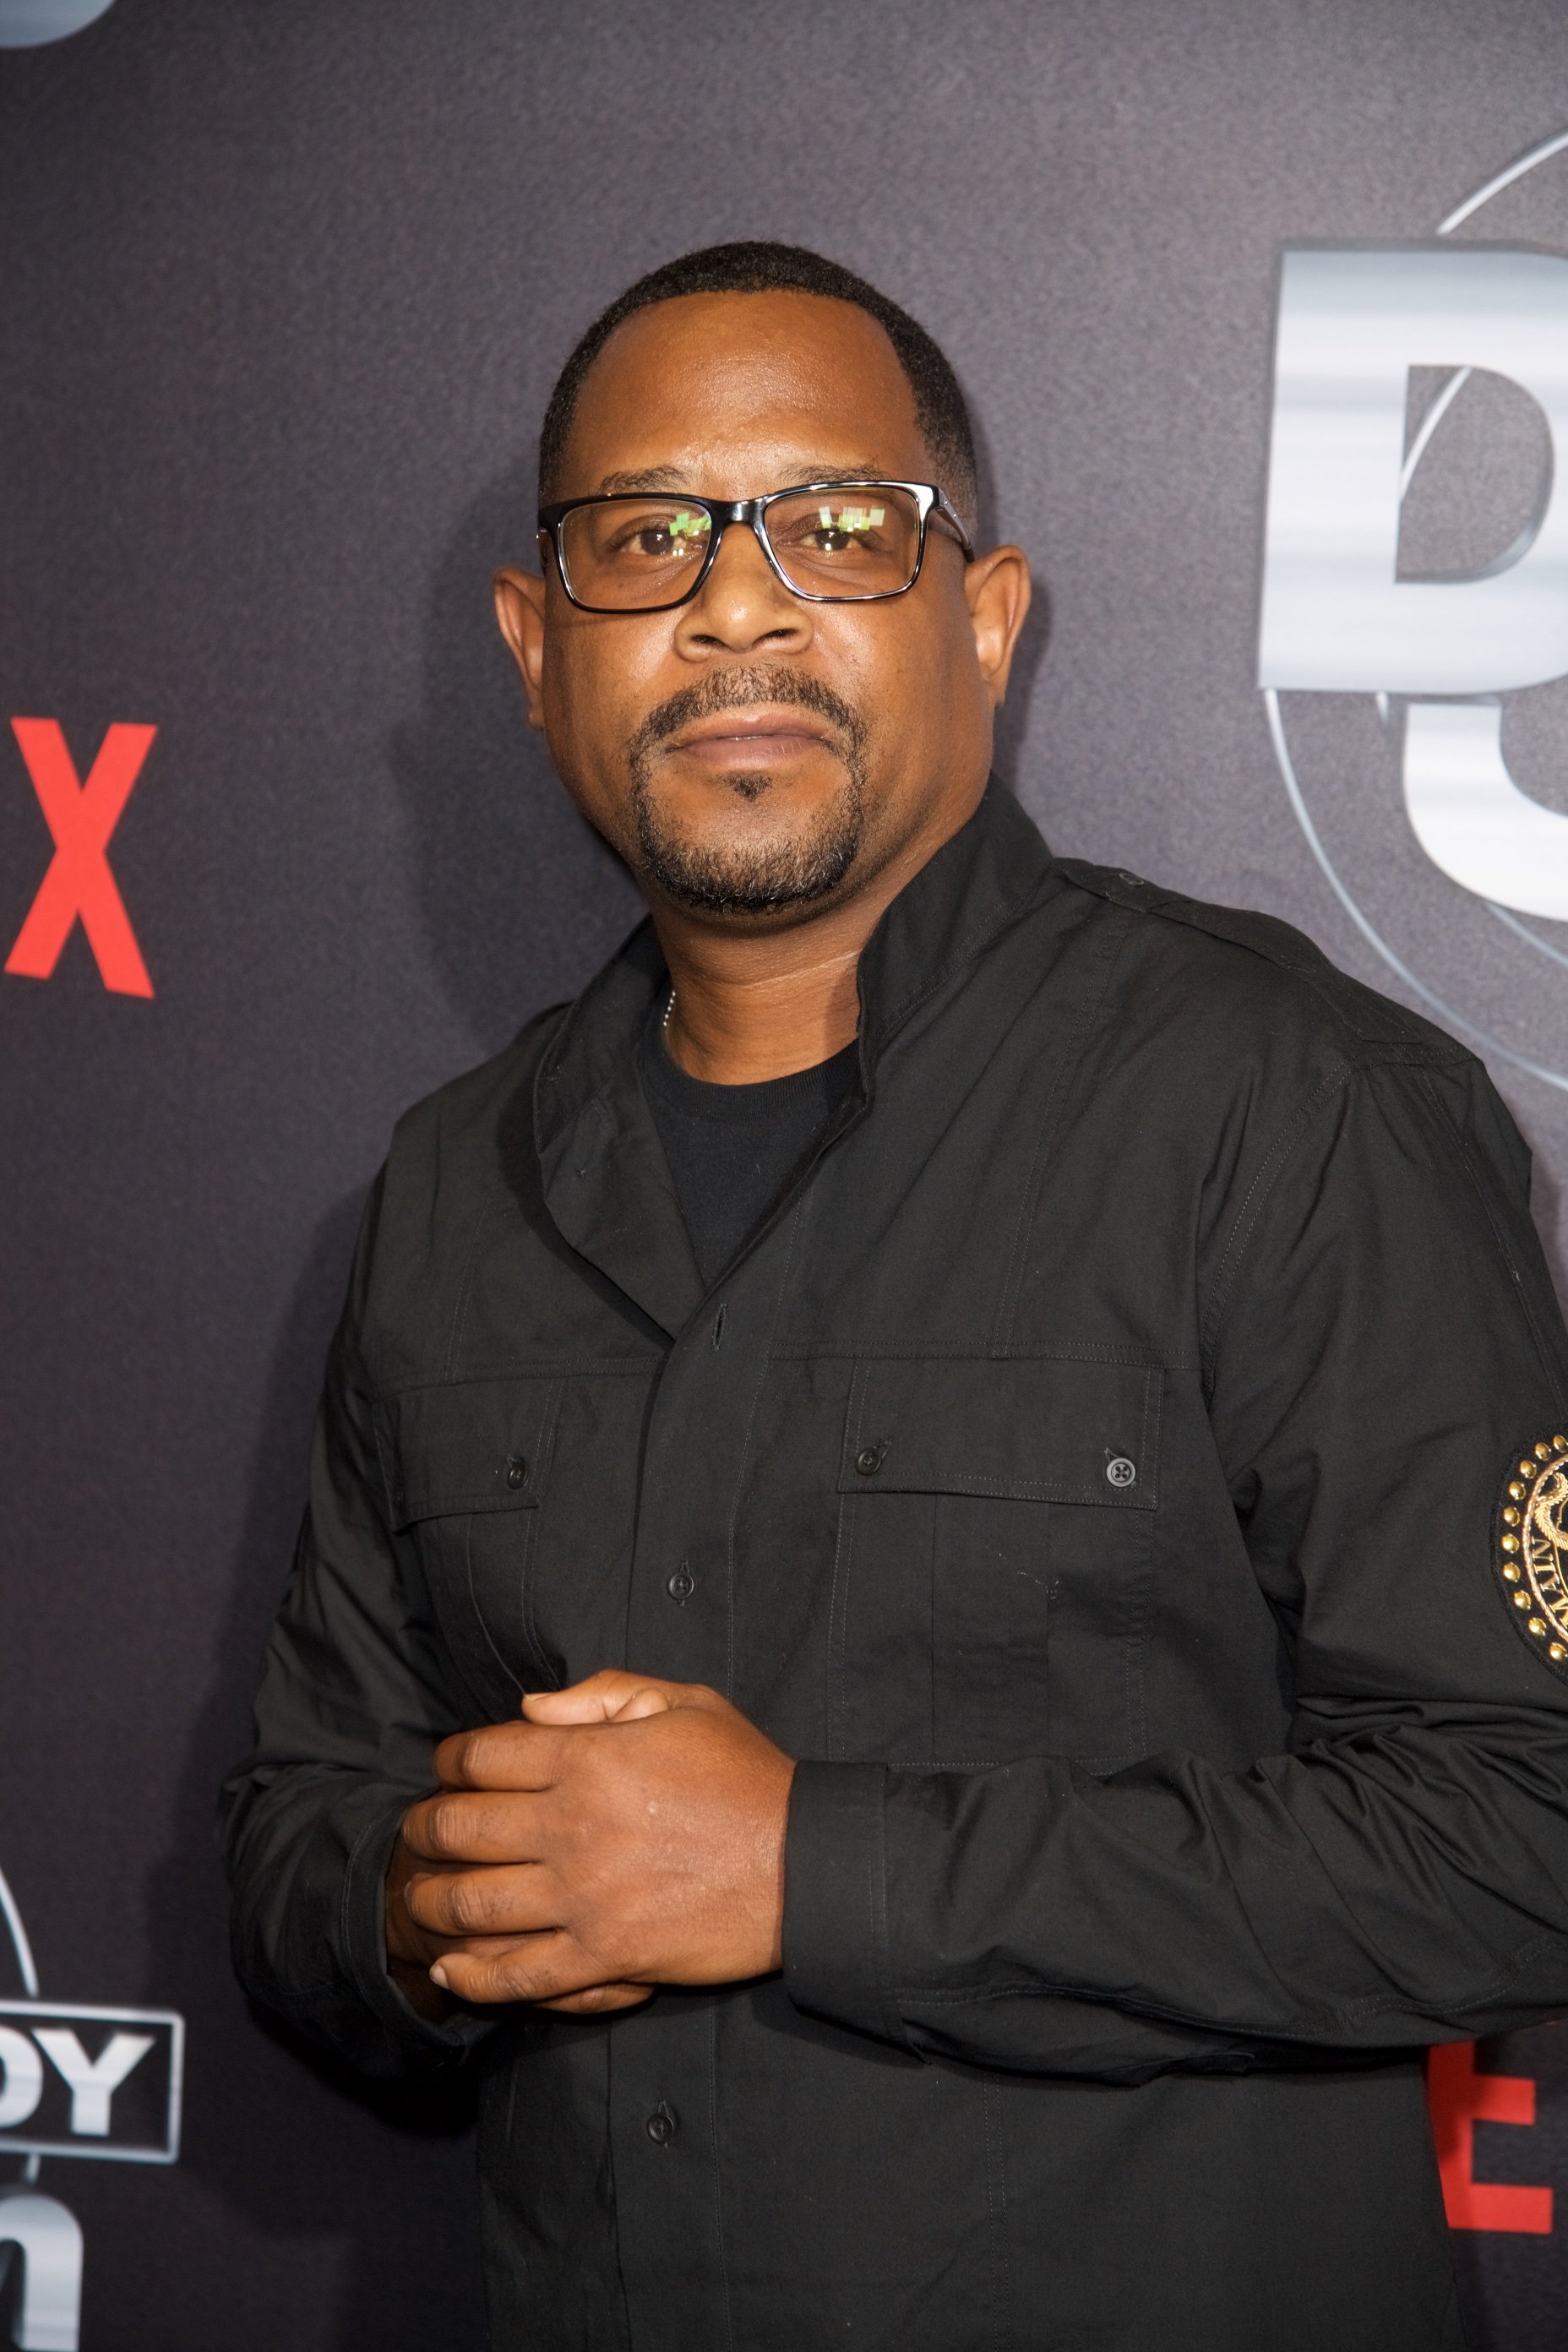 Martin Lawrence at Netflix Presents Russell Simmons "Def Comedy Jam 25" Special Event on Sept. 10, 2017 in California. | Photo: Getty Images